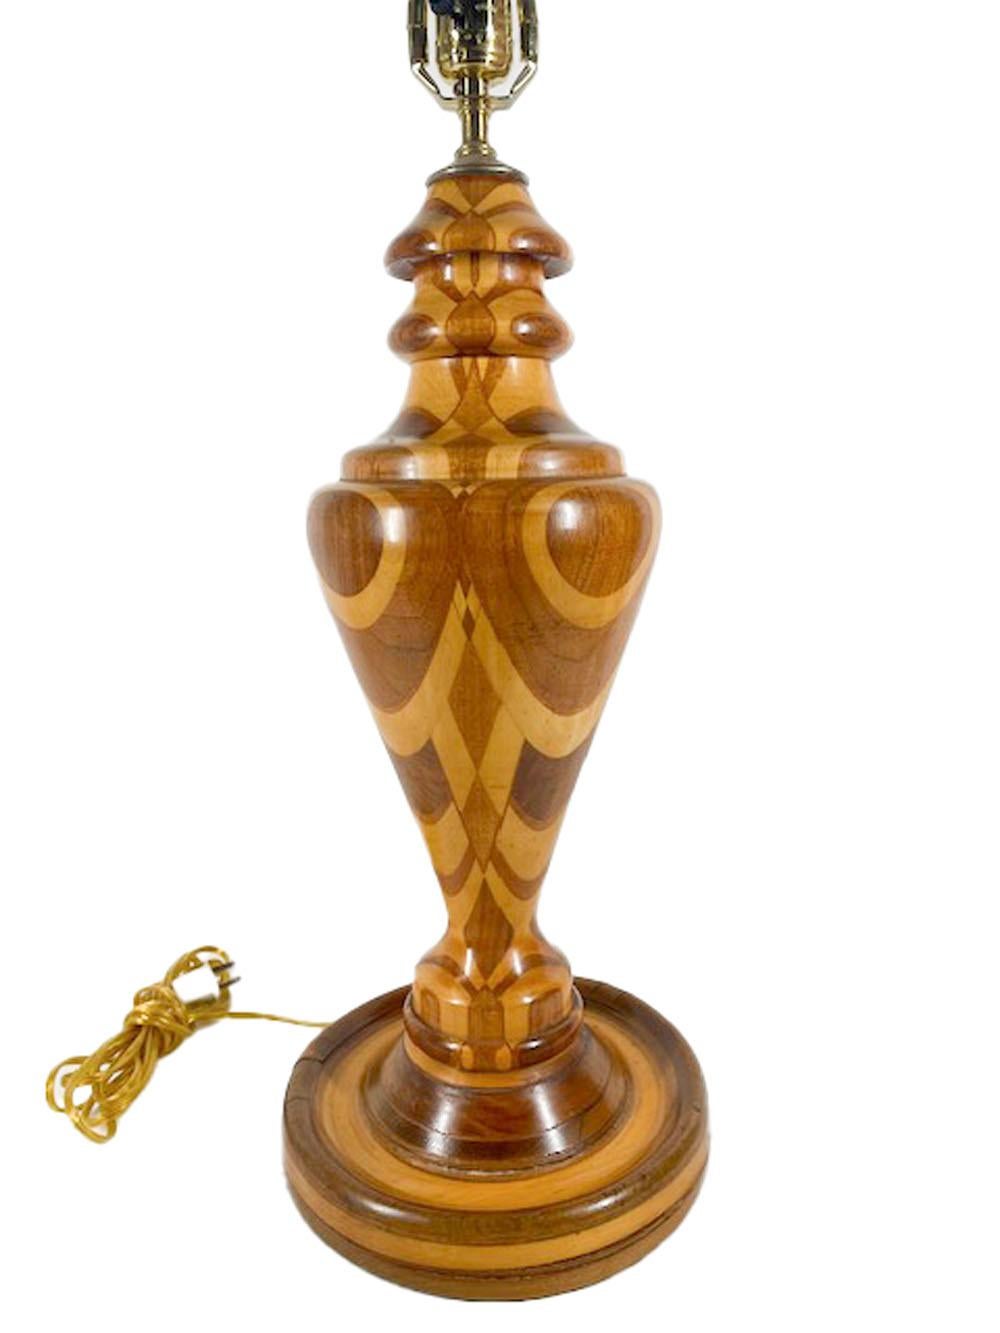 Vintage Turned Wood Lamp Made of Mahogany, Maple and Walnut In Good Condition For Sale In Nantucket, MA